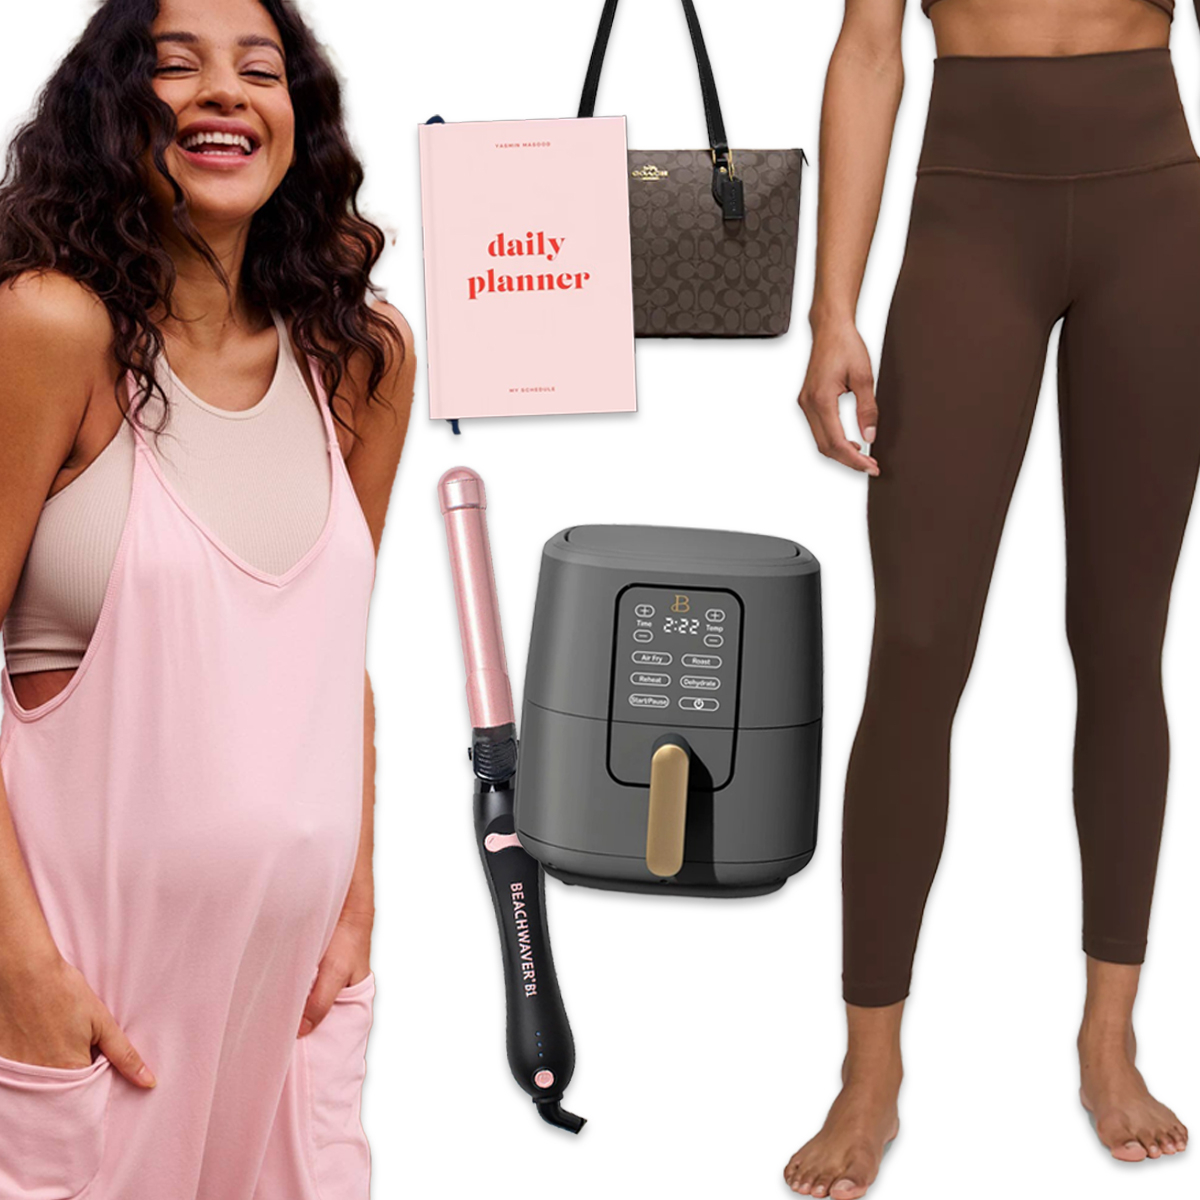 15 Practical Mother’s Day Gifts She’ll Actually Use